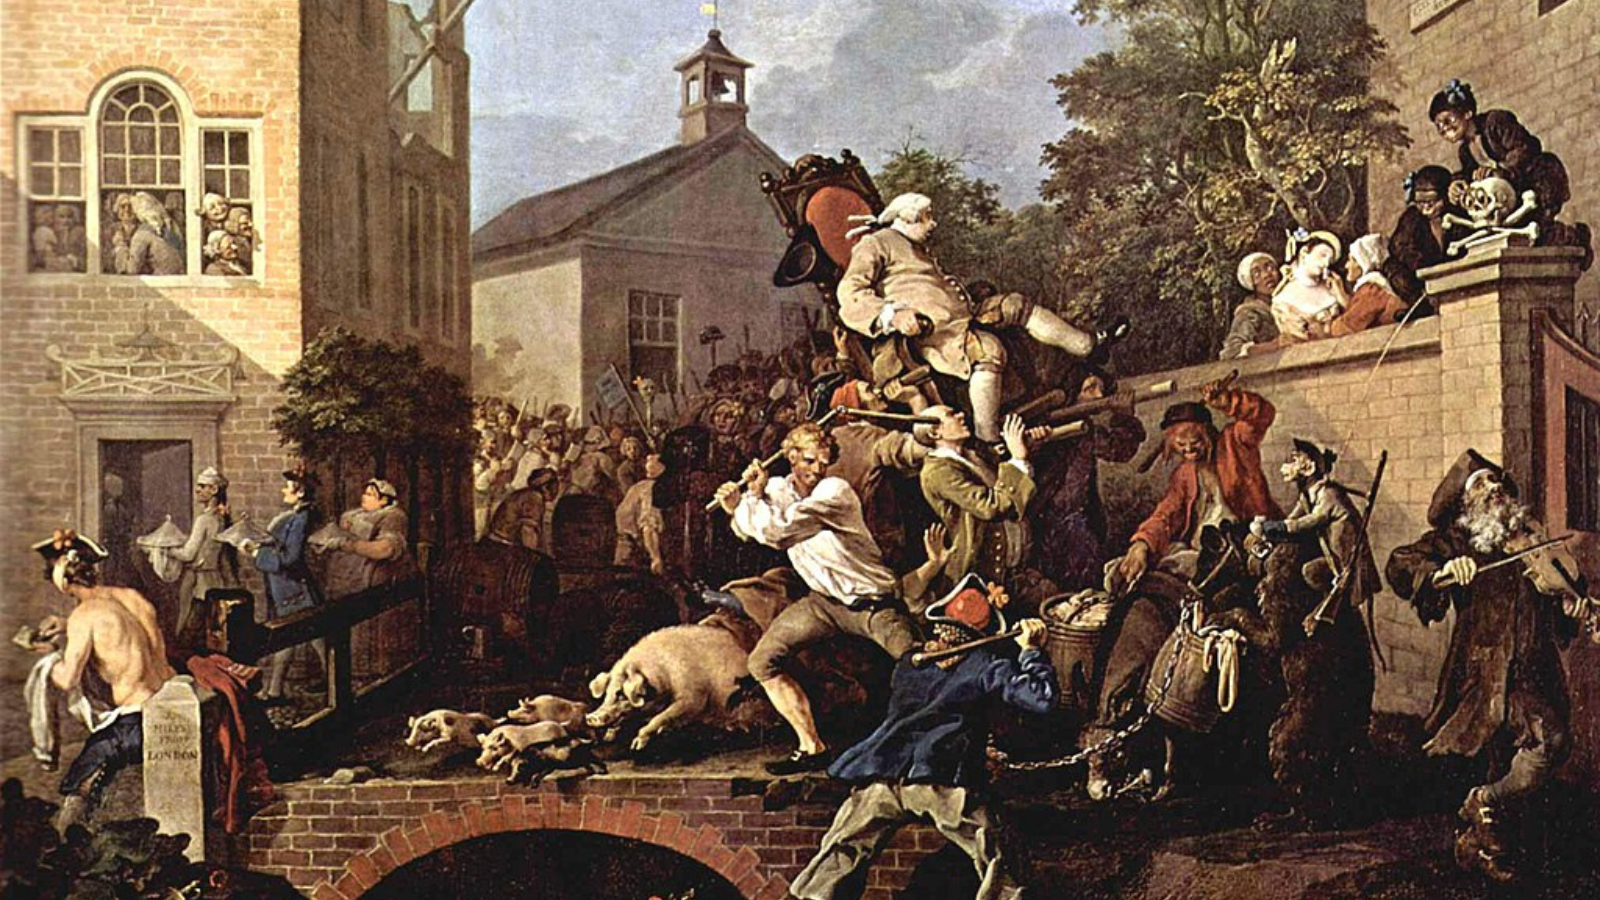 victorious Tory candidates carried through the streets on a chair on william hogarth's painting series on the humor of the election